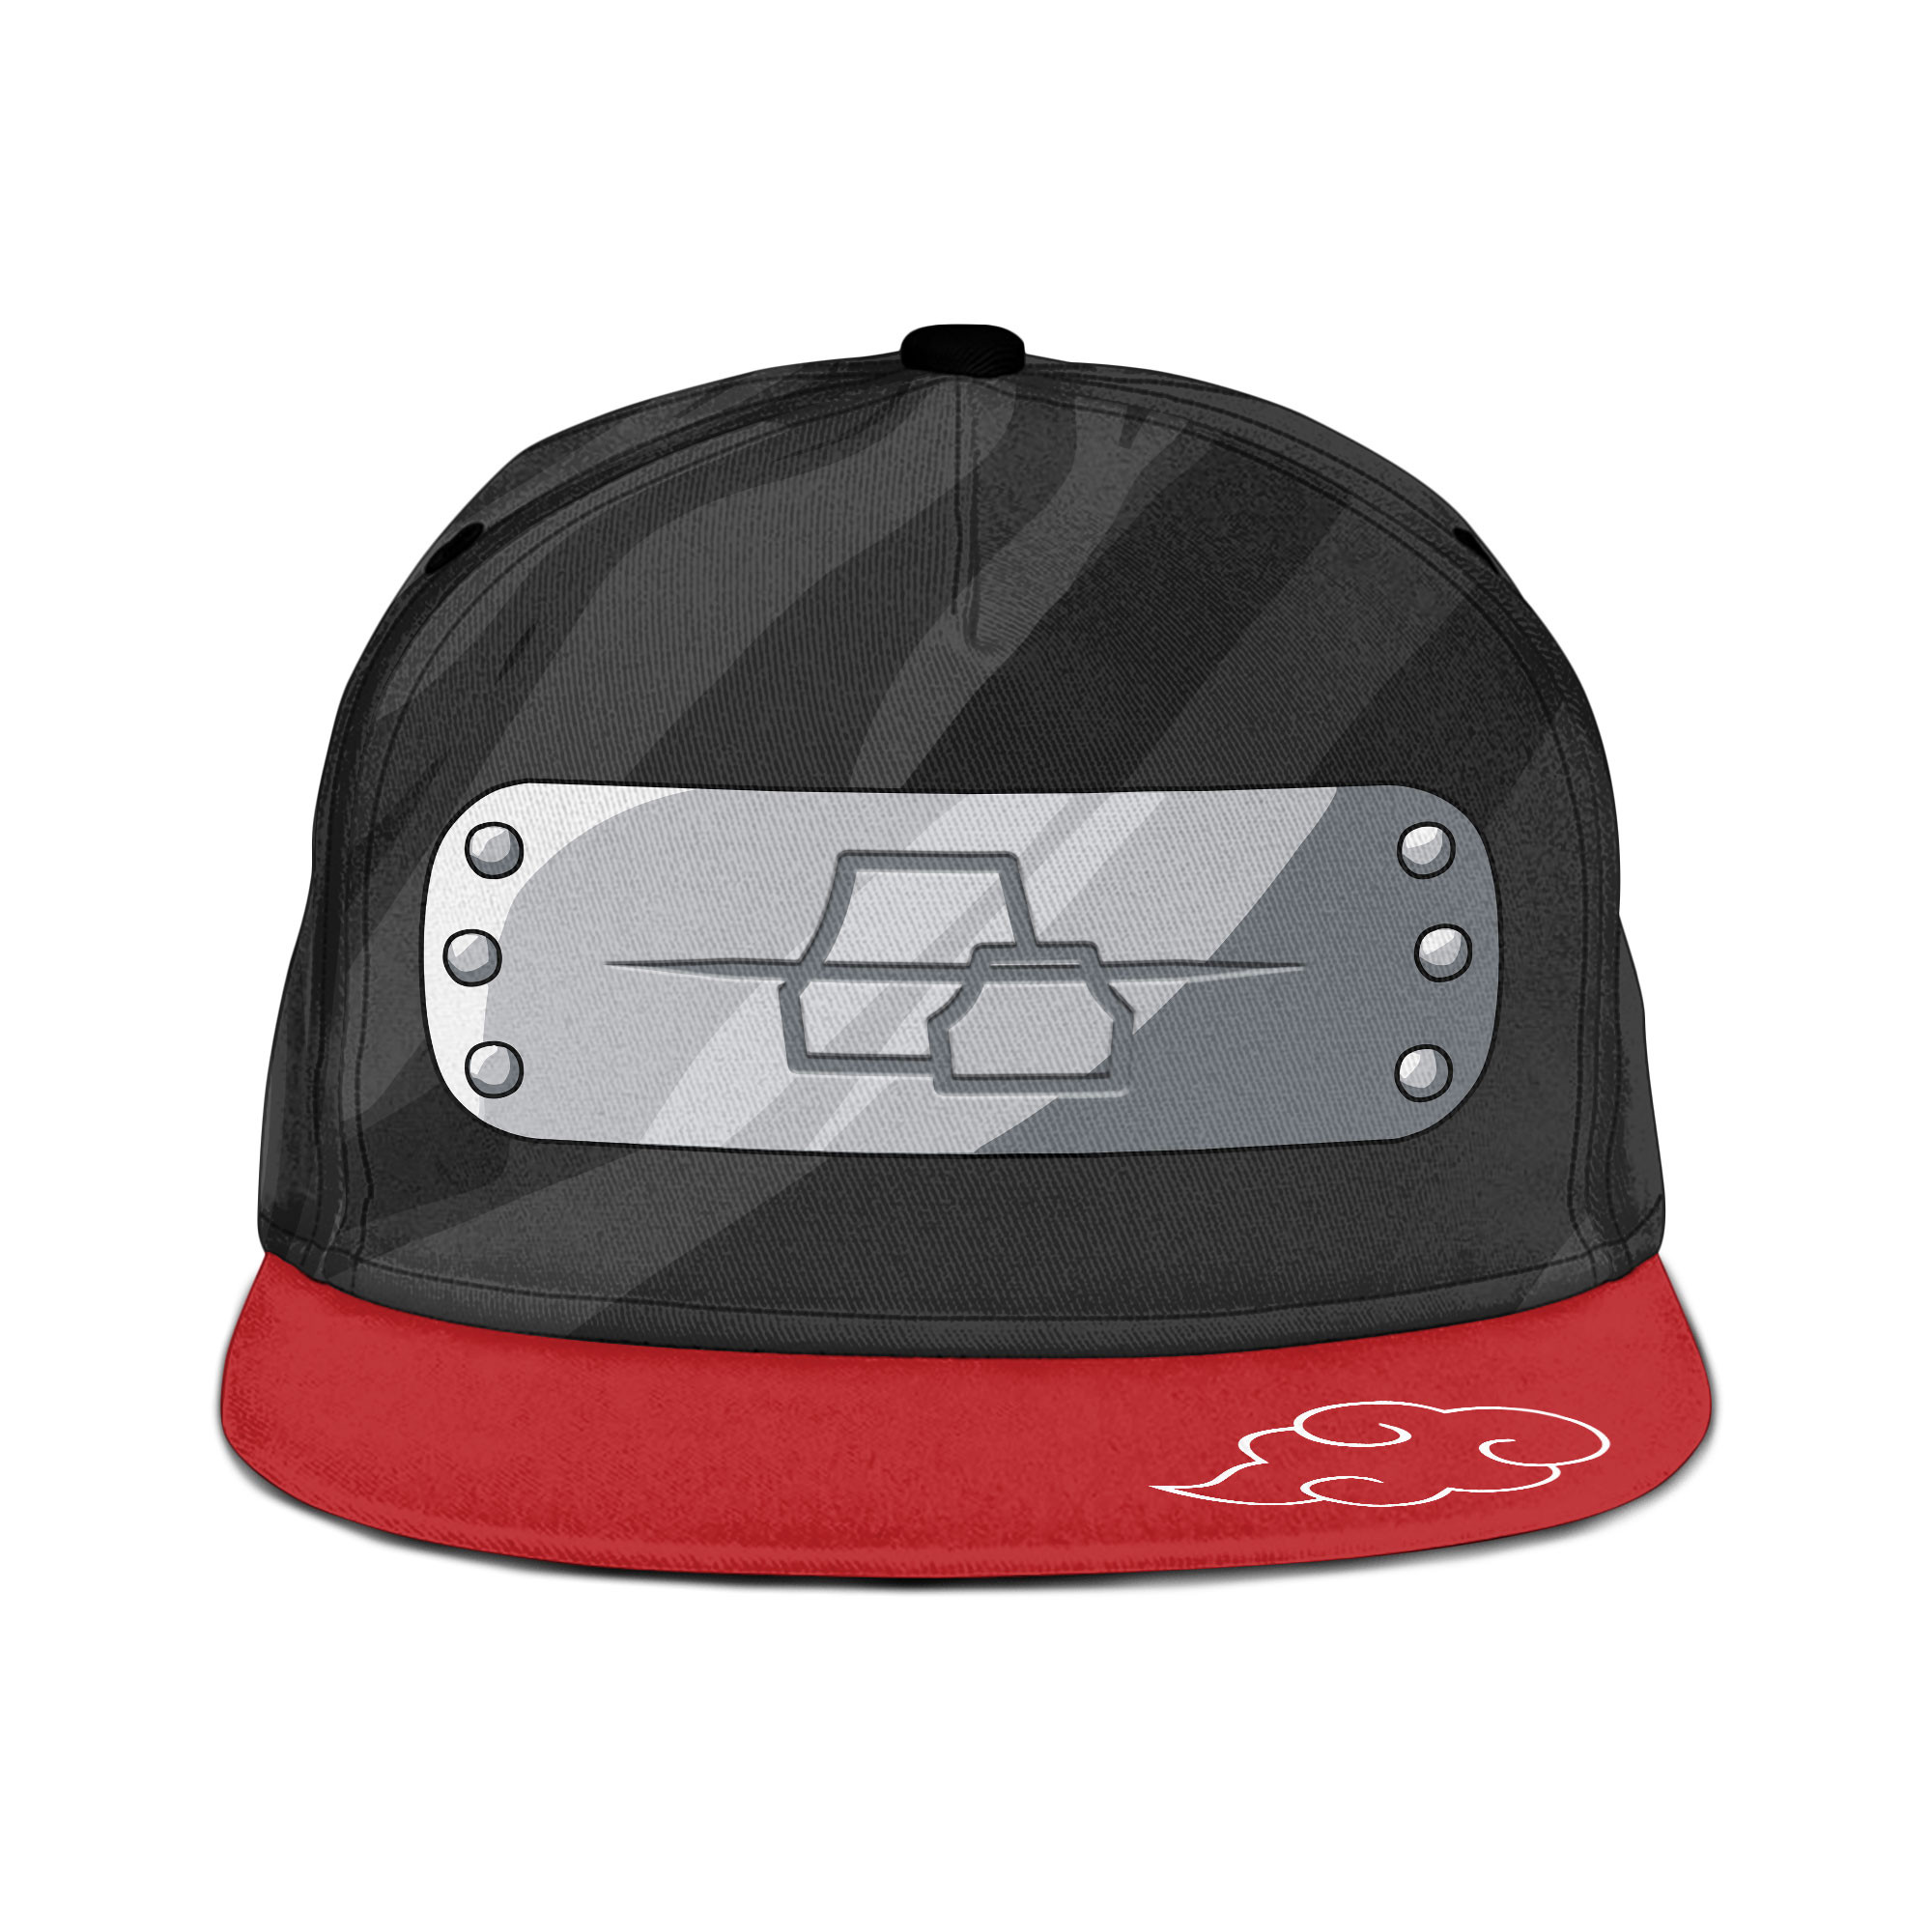 If you're looking to buy new snapback cap, here's what you need to know! 189